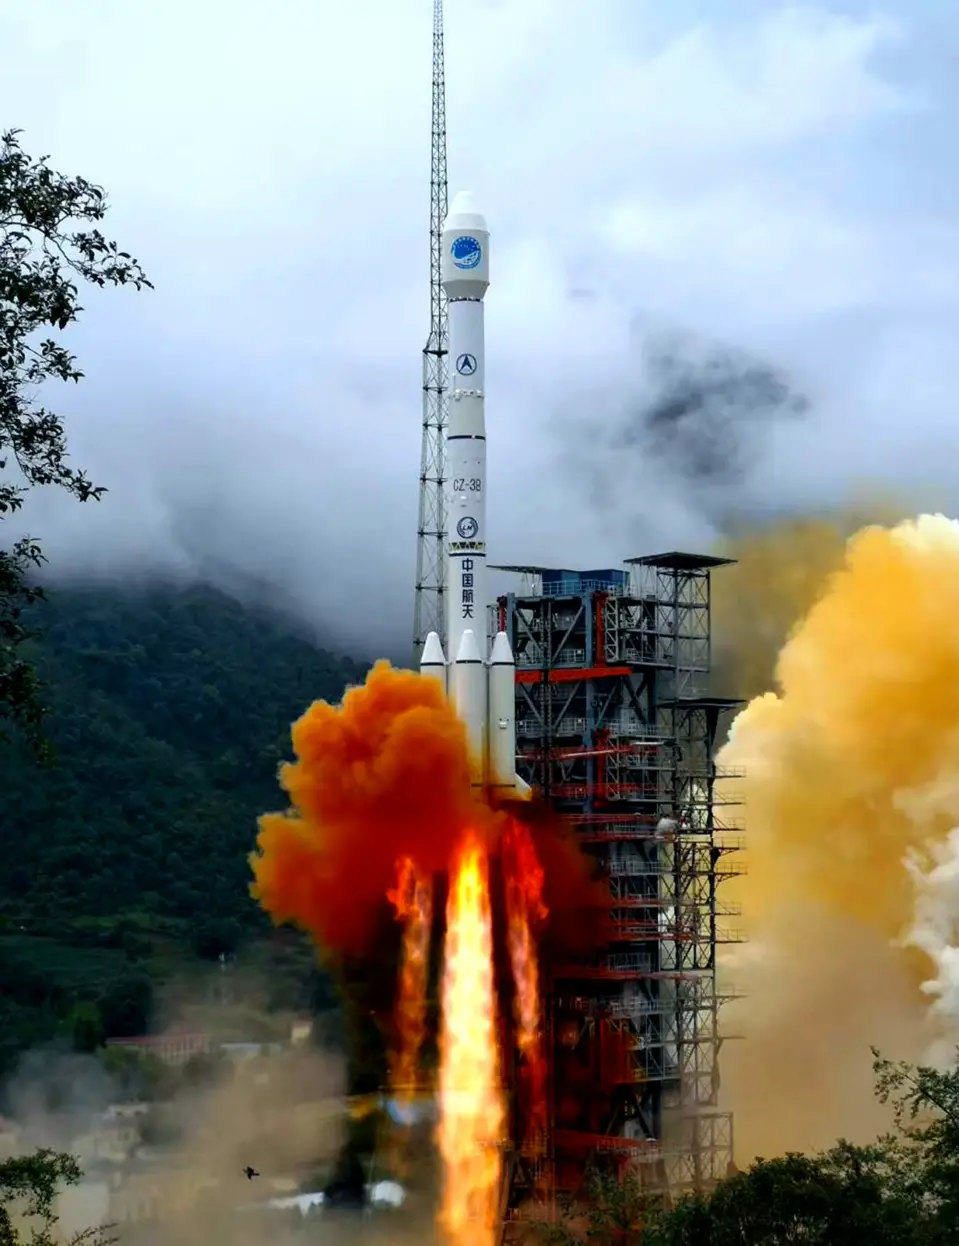 China launched the last satellite of the BeiDou Navigation Satellite System on a Long March-3B rocket from the Xichang Satellite Launch Center in Sichuan at 9:43 am on June 23. Photo by Li Jieyi/People’s Daily Online